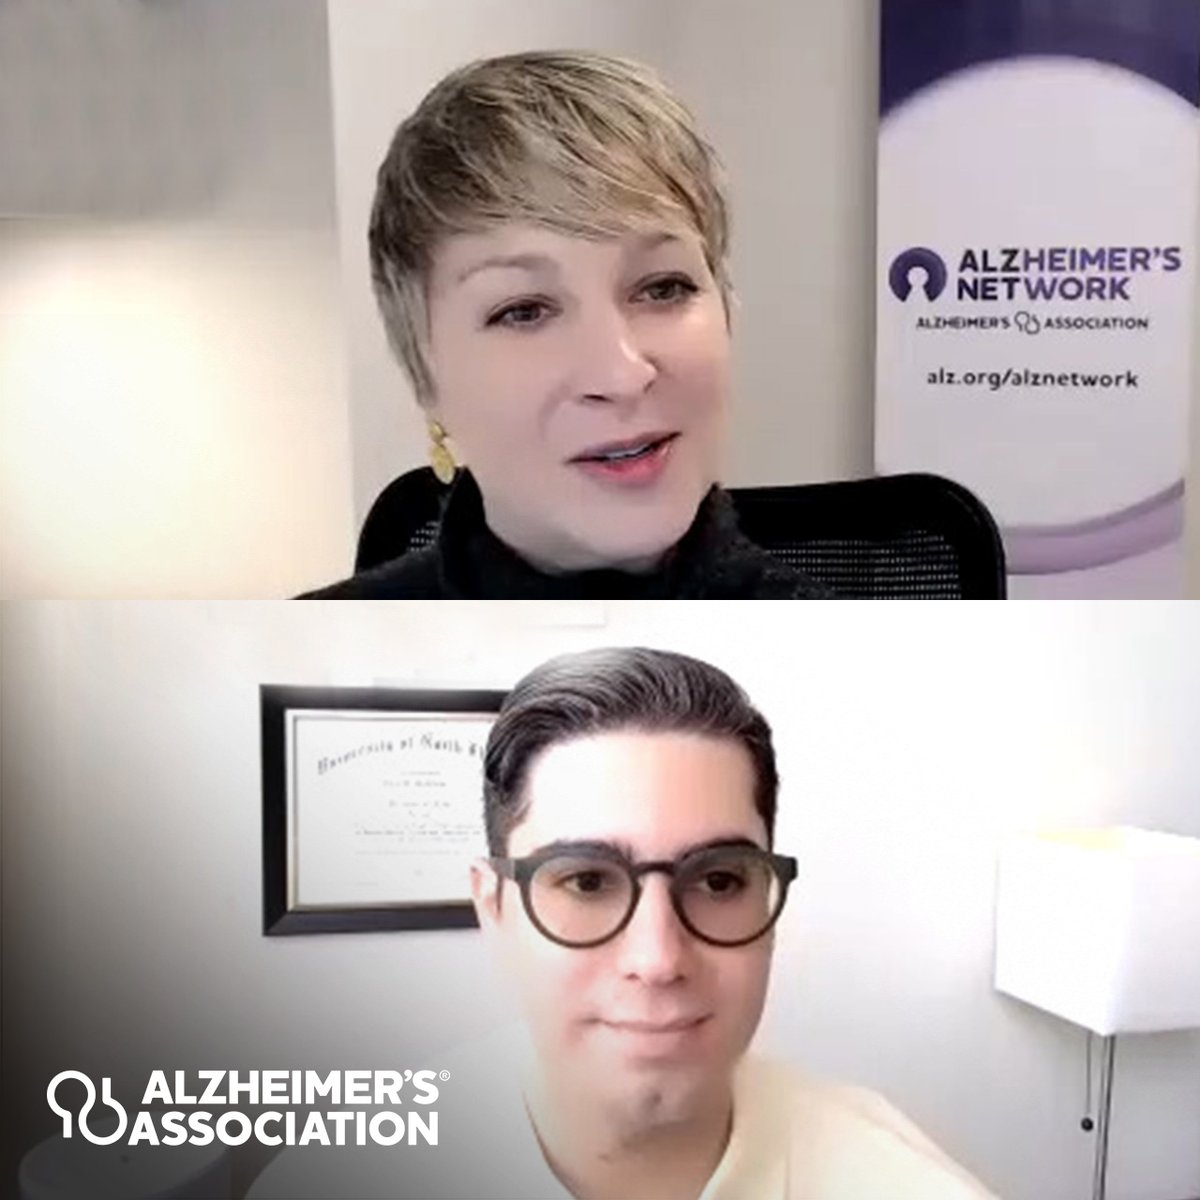 Can healthy habits reduce your risk of cognitive decline and possibly dementia? Watch this video from the Alzheimer's Association to learn what the research says and hear from someone who is making positive changes in their life.  bit.ly/4dHP4B9 @alzassociation